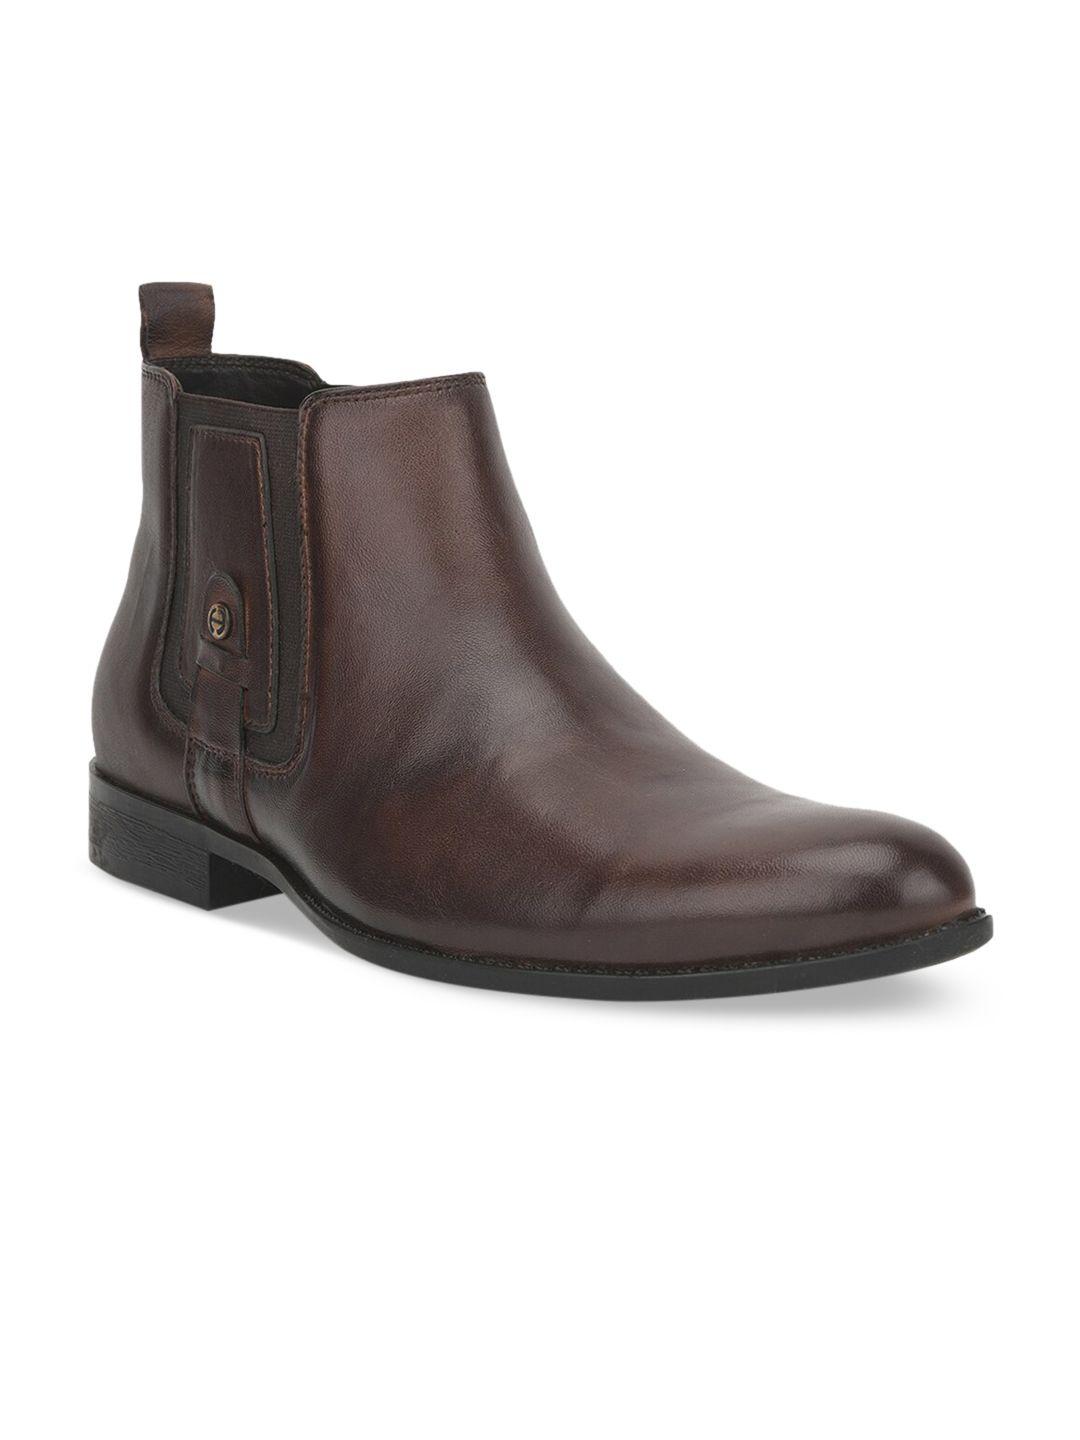 liberty-men-brown-solid-leather-formal-boots